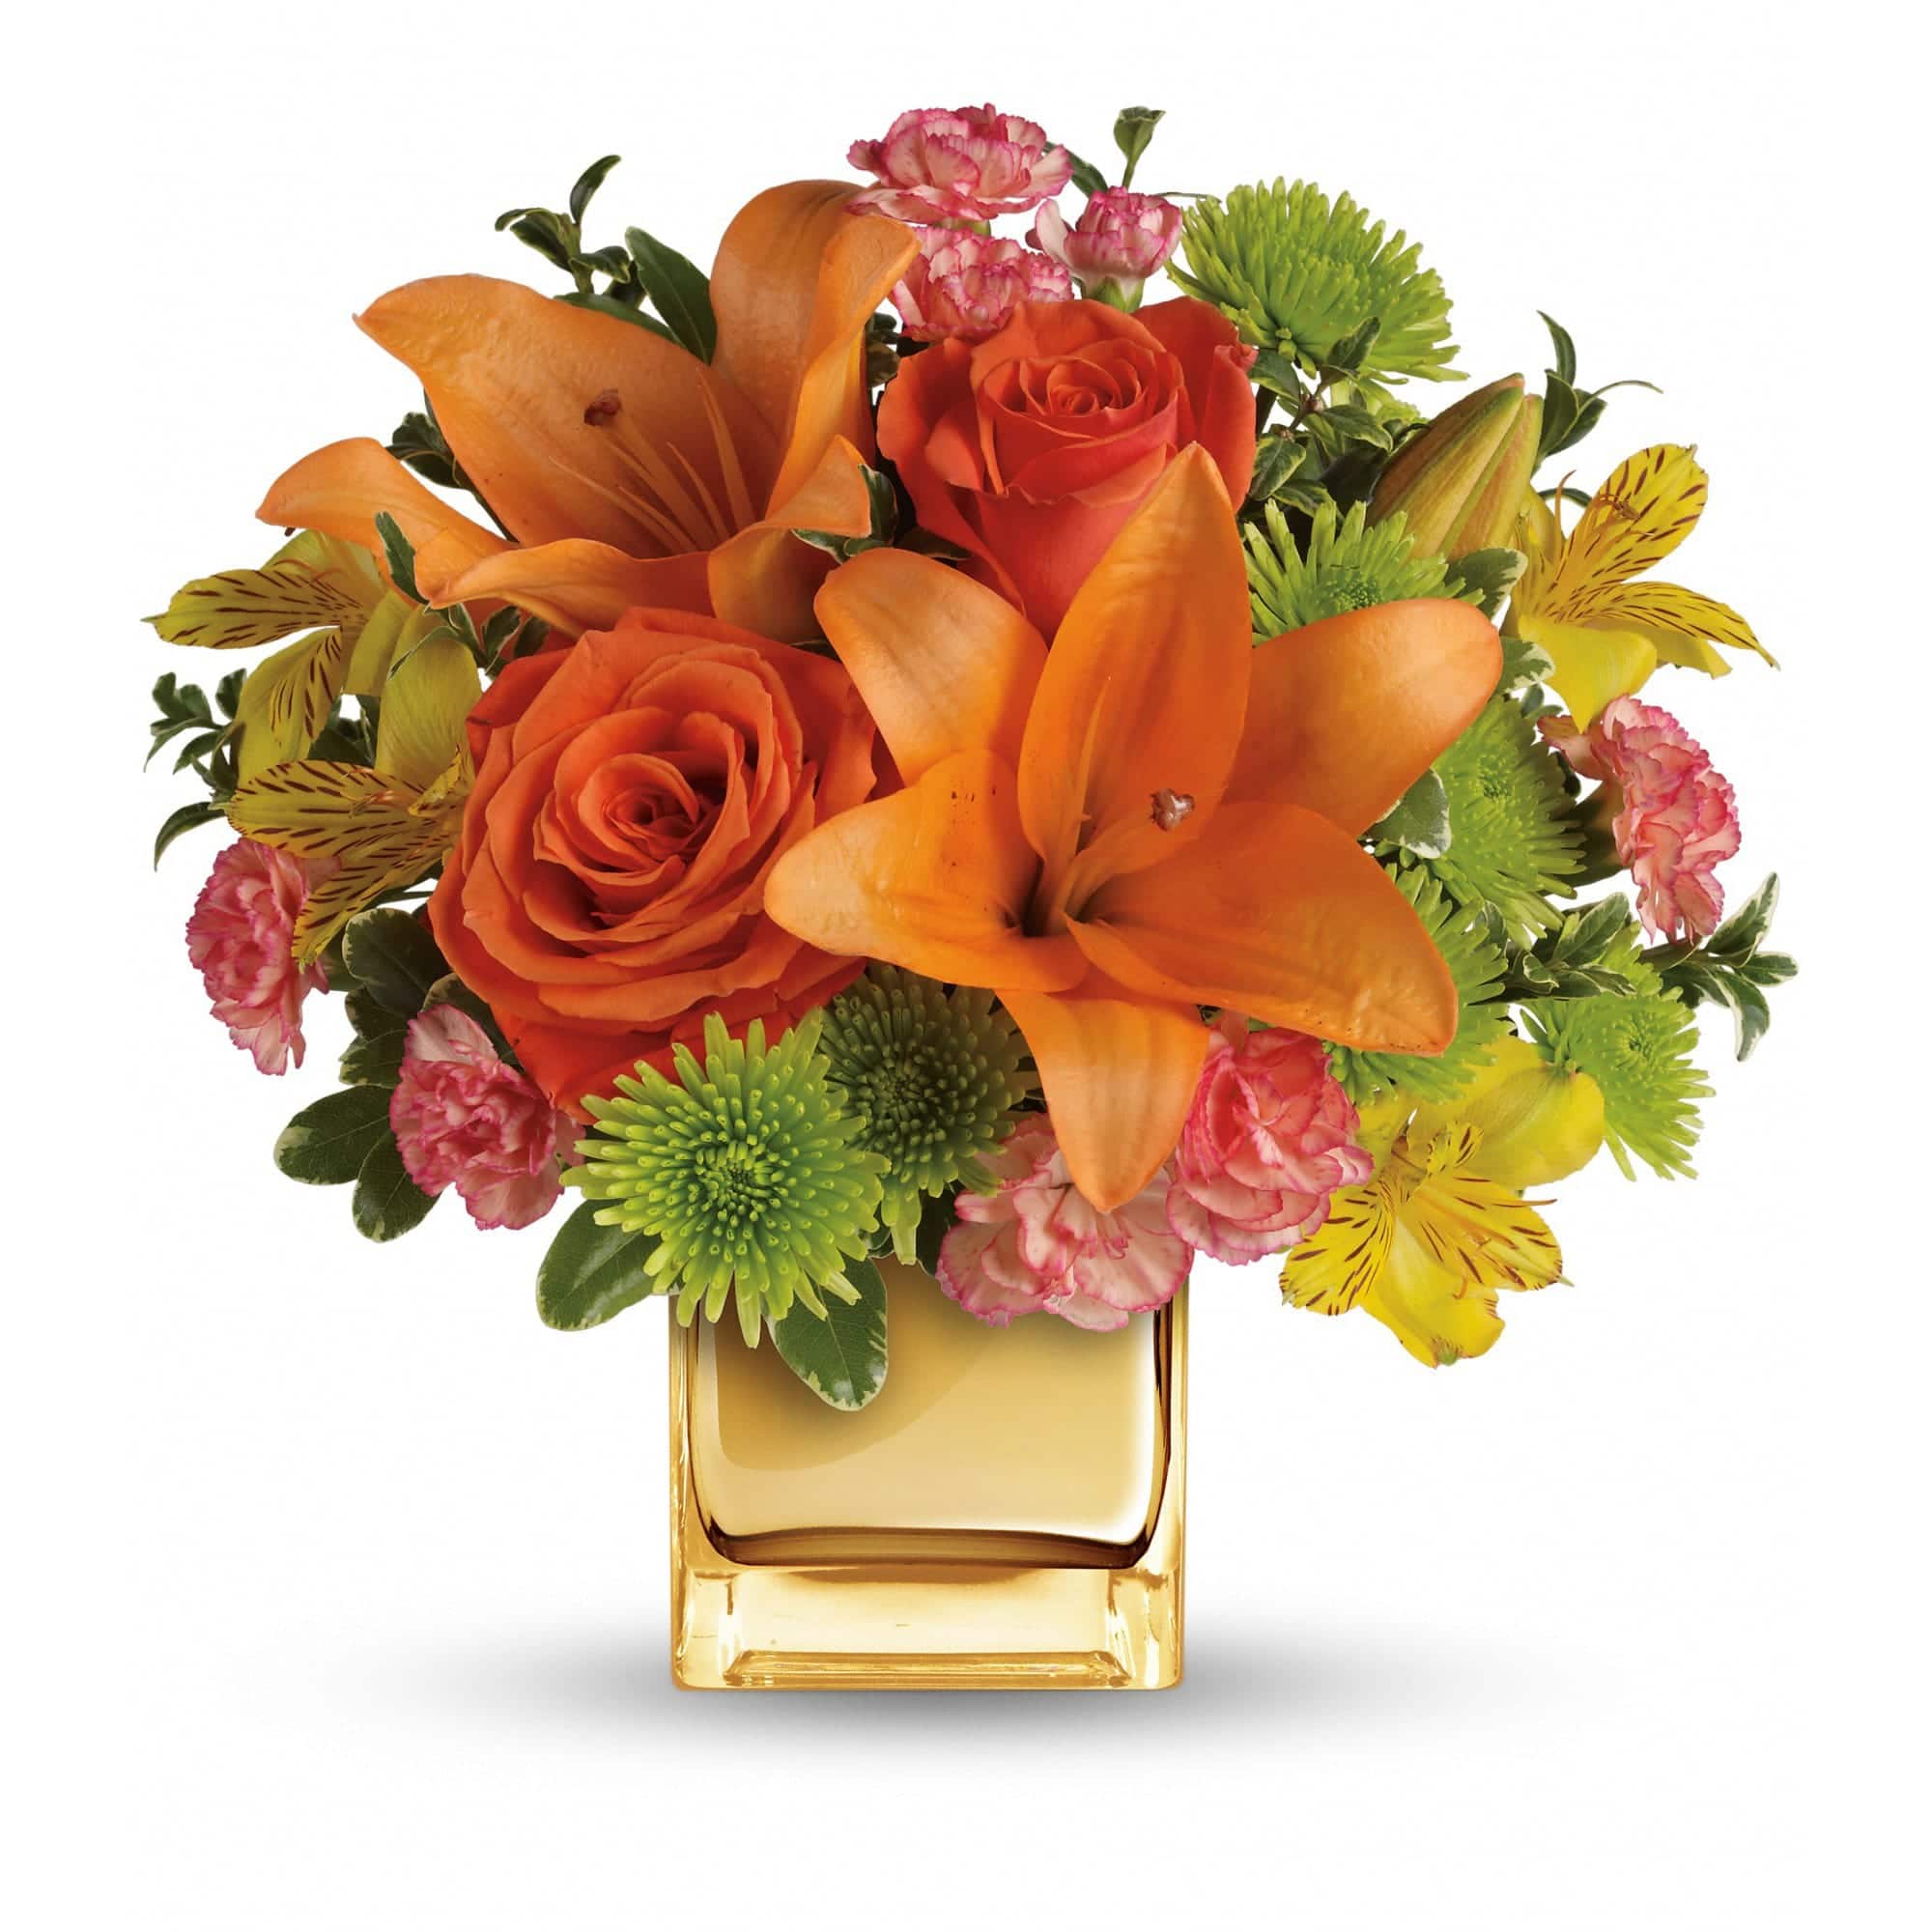 lilies and roses in radiant shades